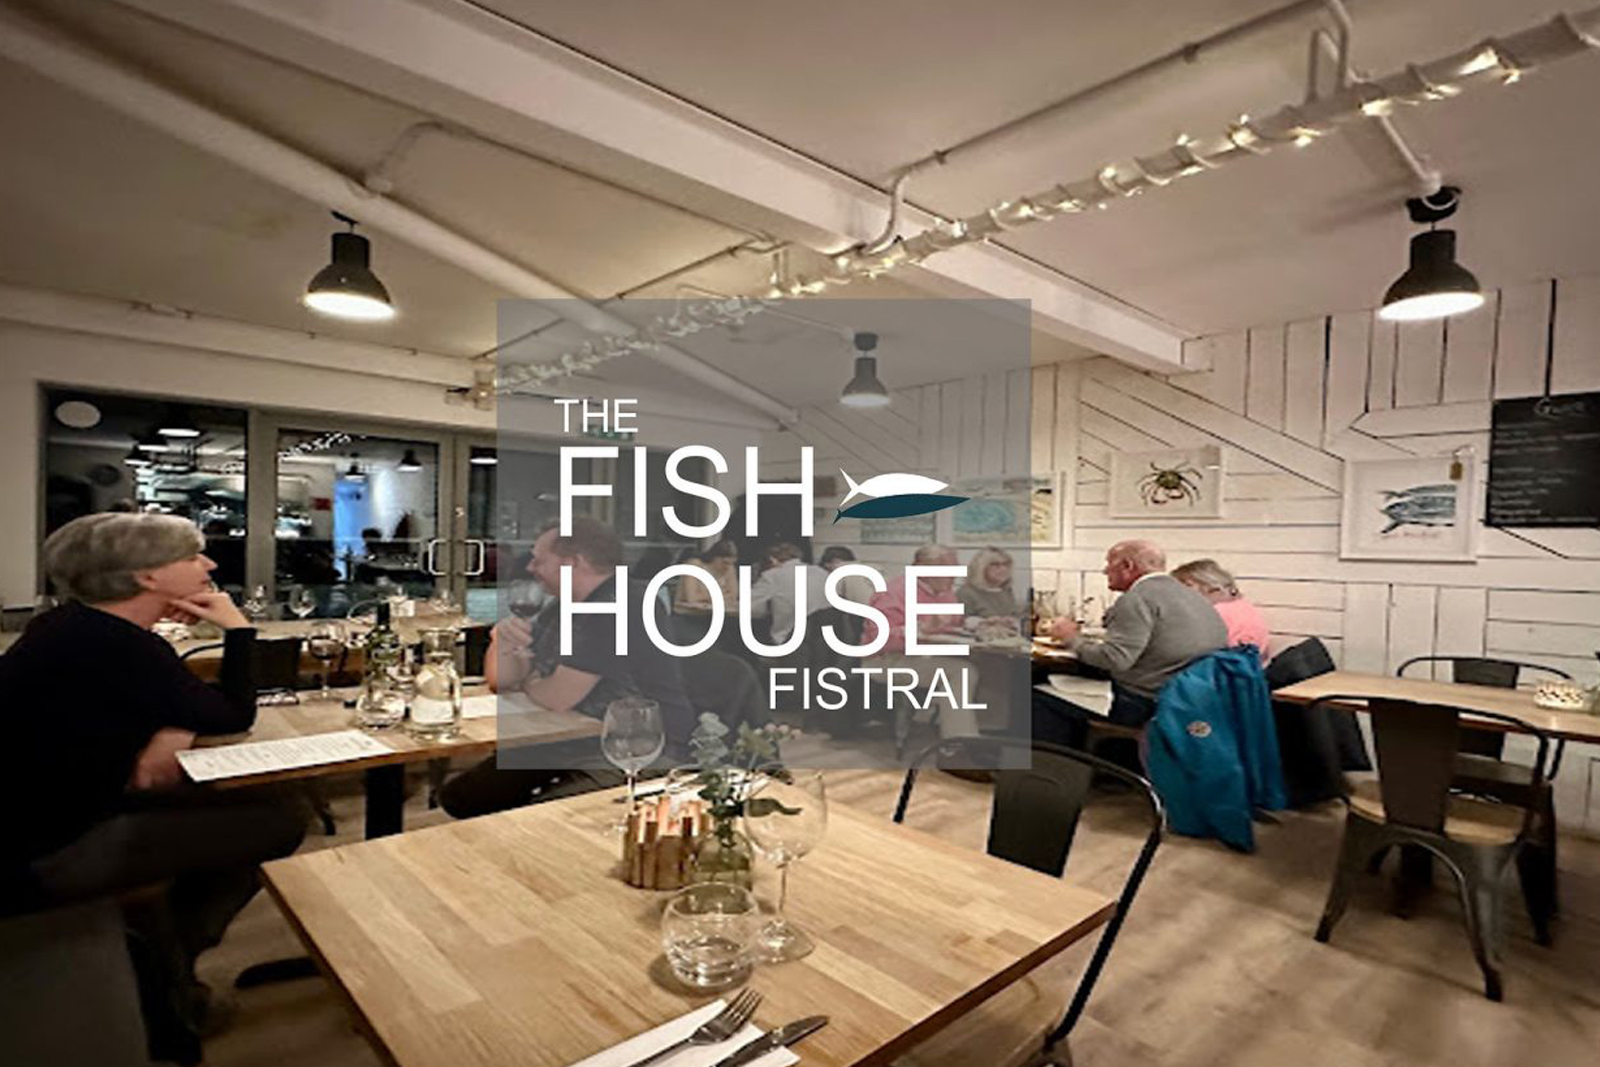 The-Fish-House-Fistral-Newquay-Clubbing-1536x864